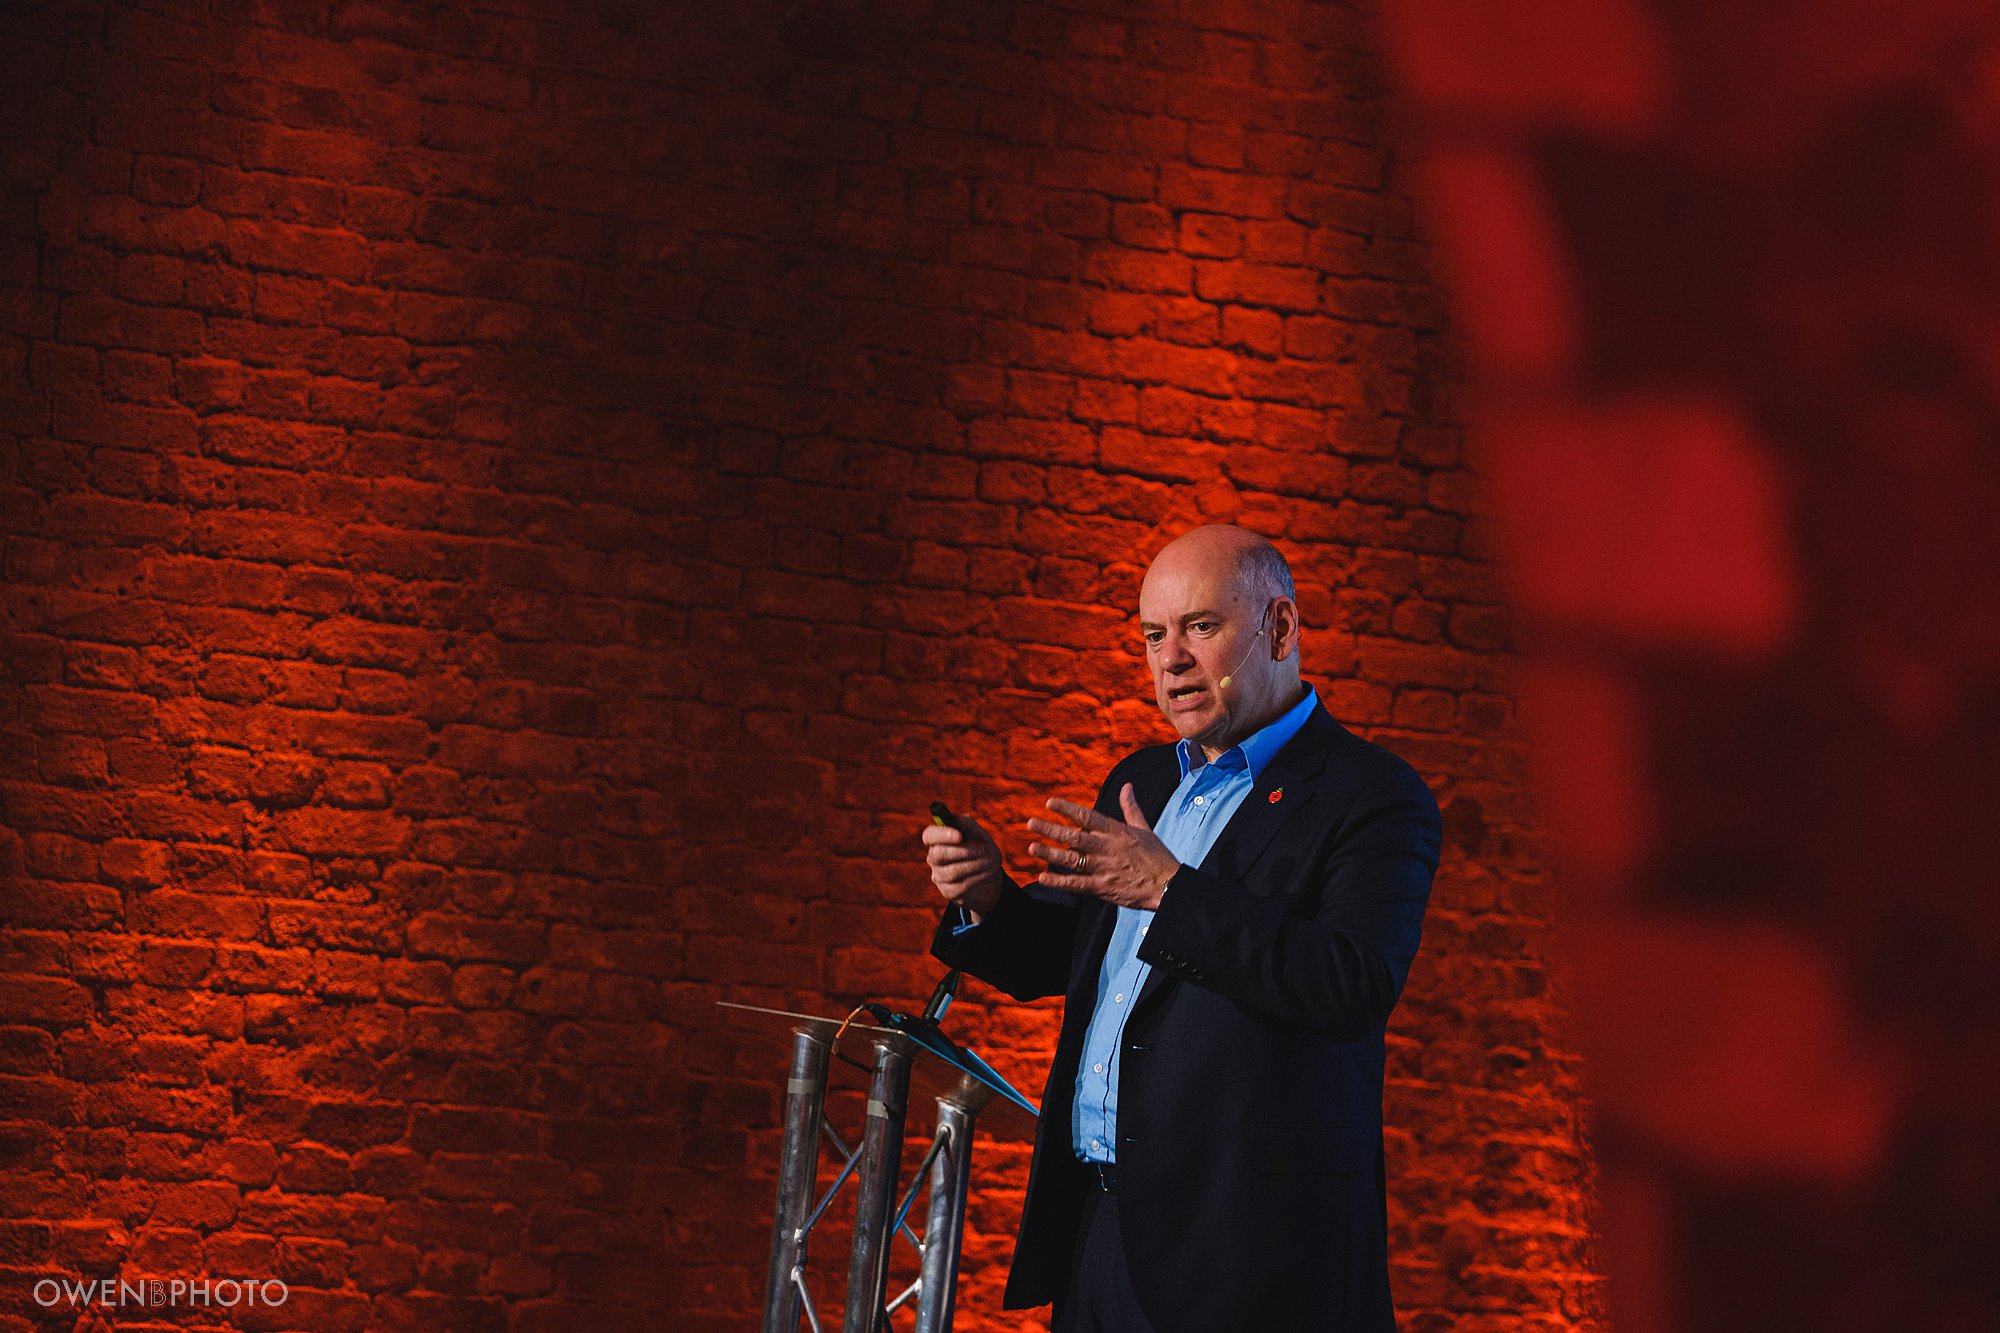 lord jonathan evans speaks at a corporate conference at the steelyard in london